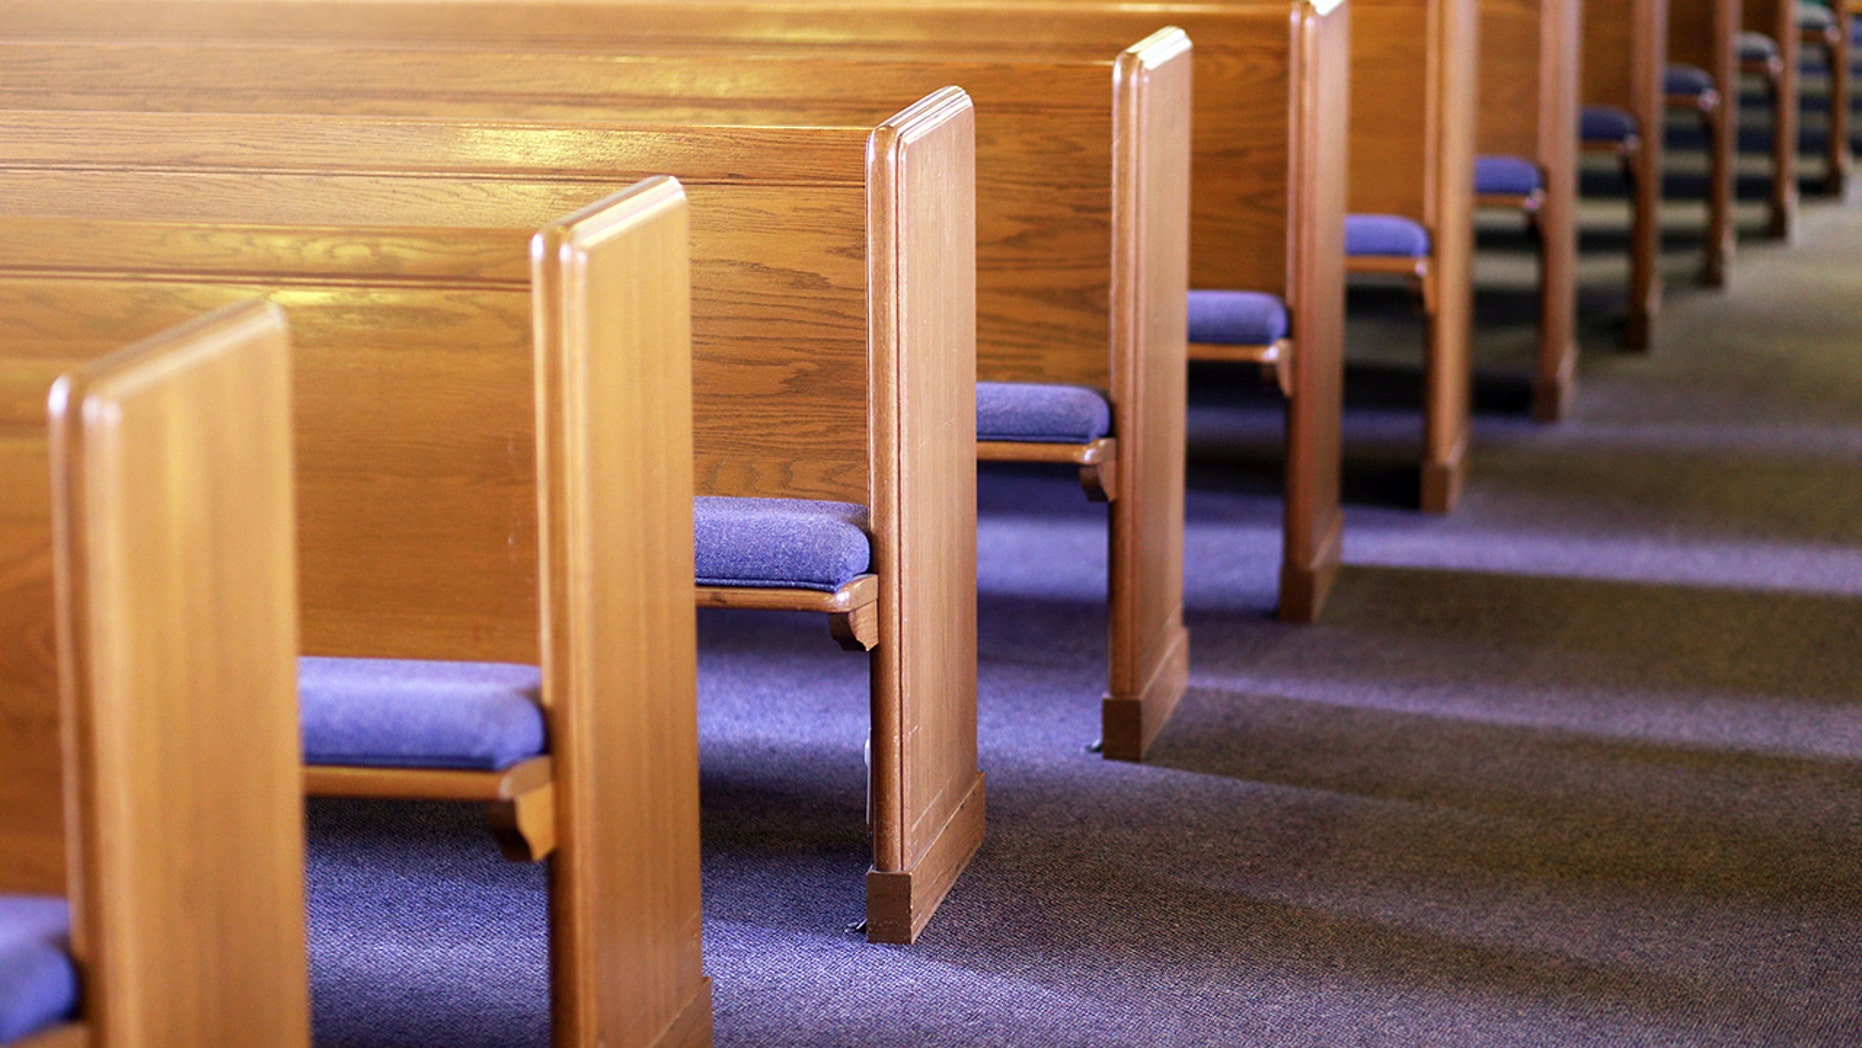 Here’s why people abandoned church and the right way to fix it